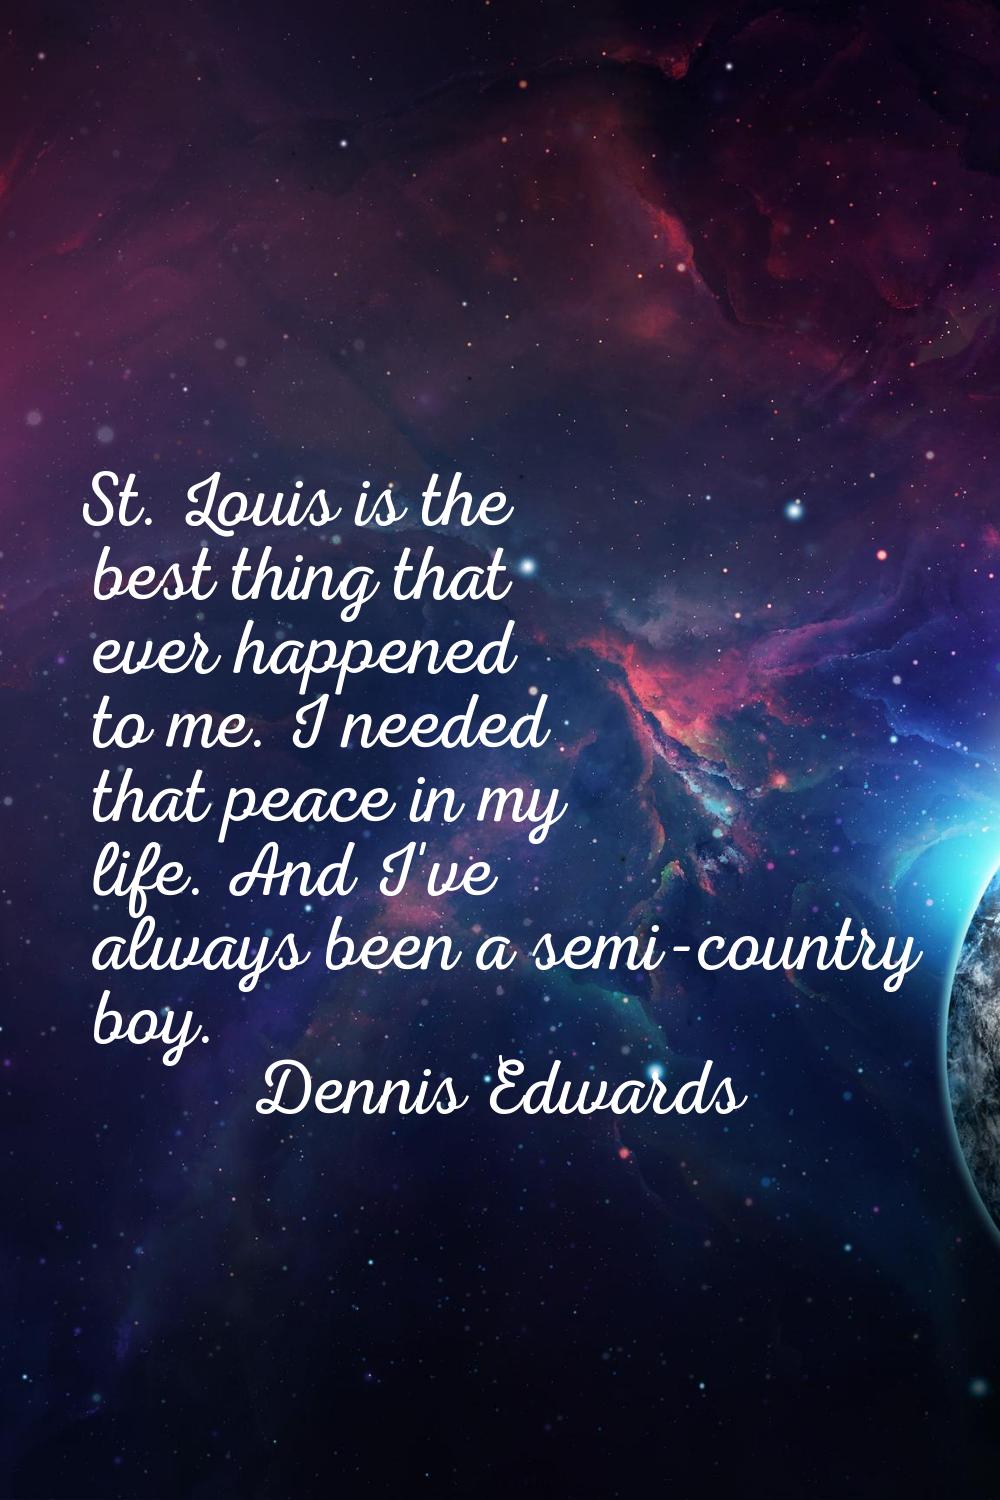 St. Louis is the best thing that ever happened to me. I needed that peace in my life. And I've alwa